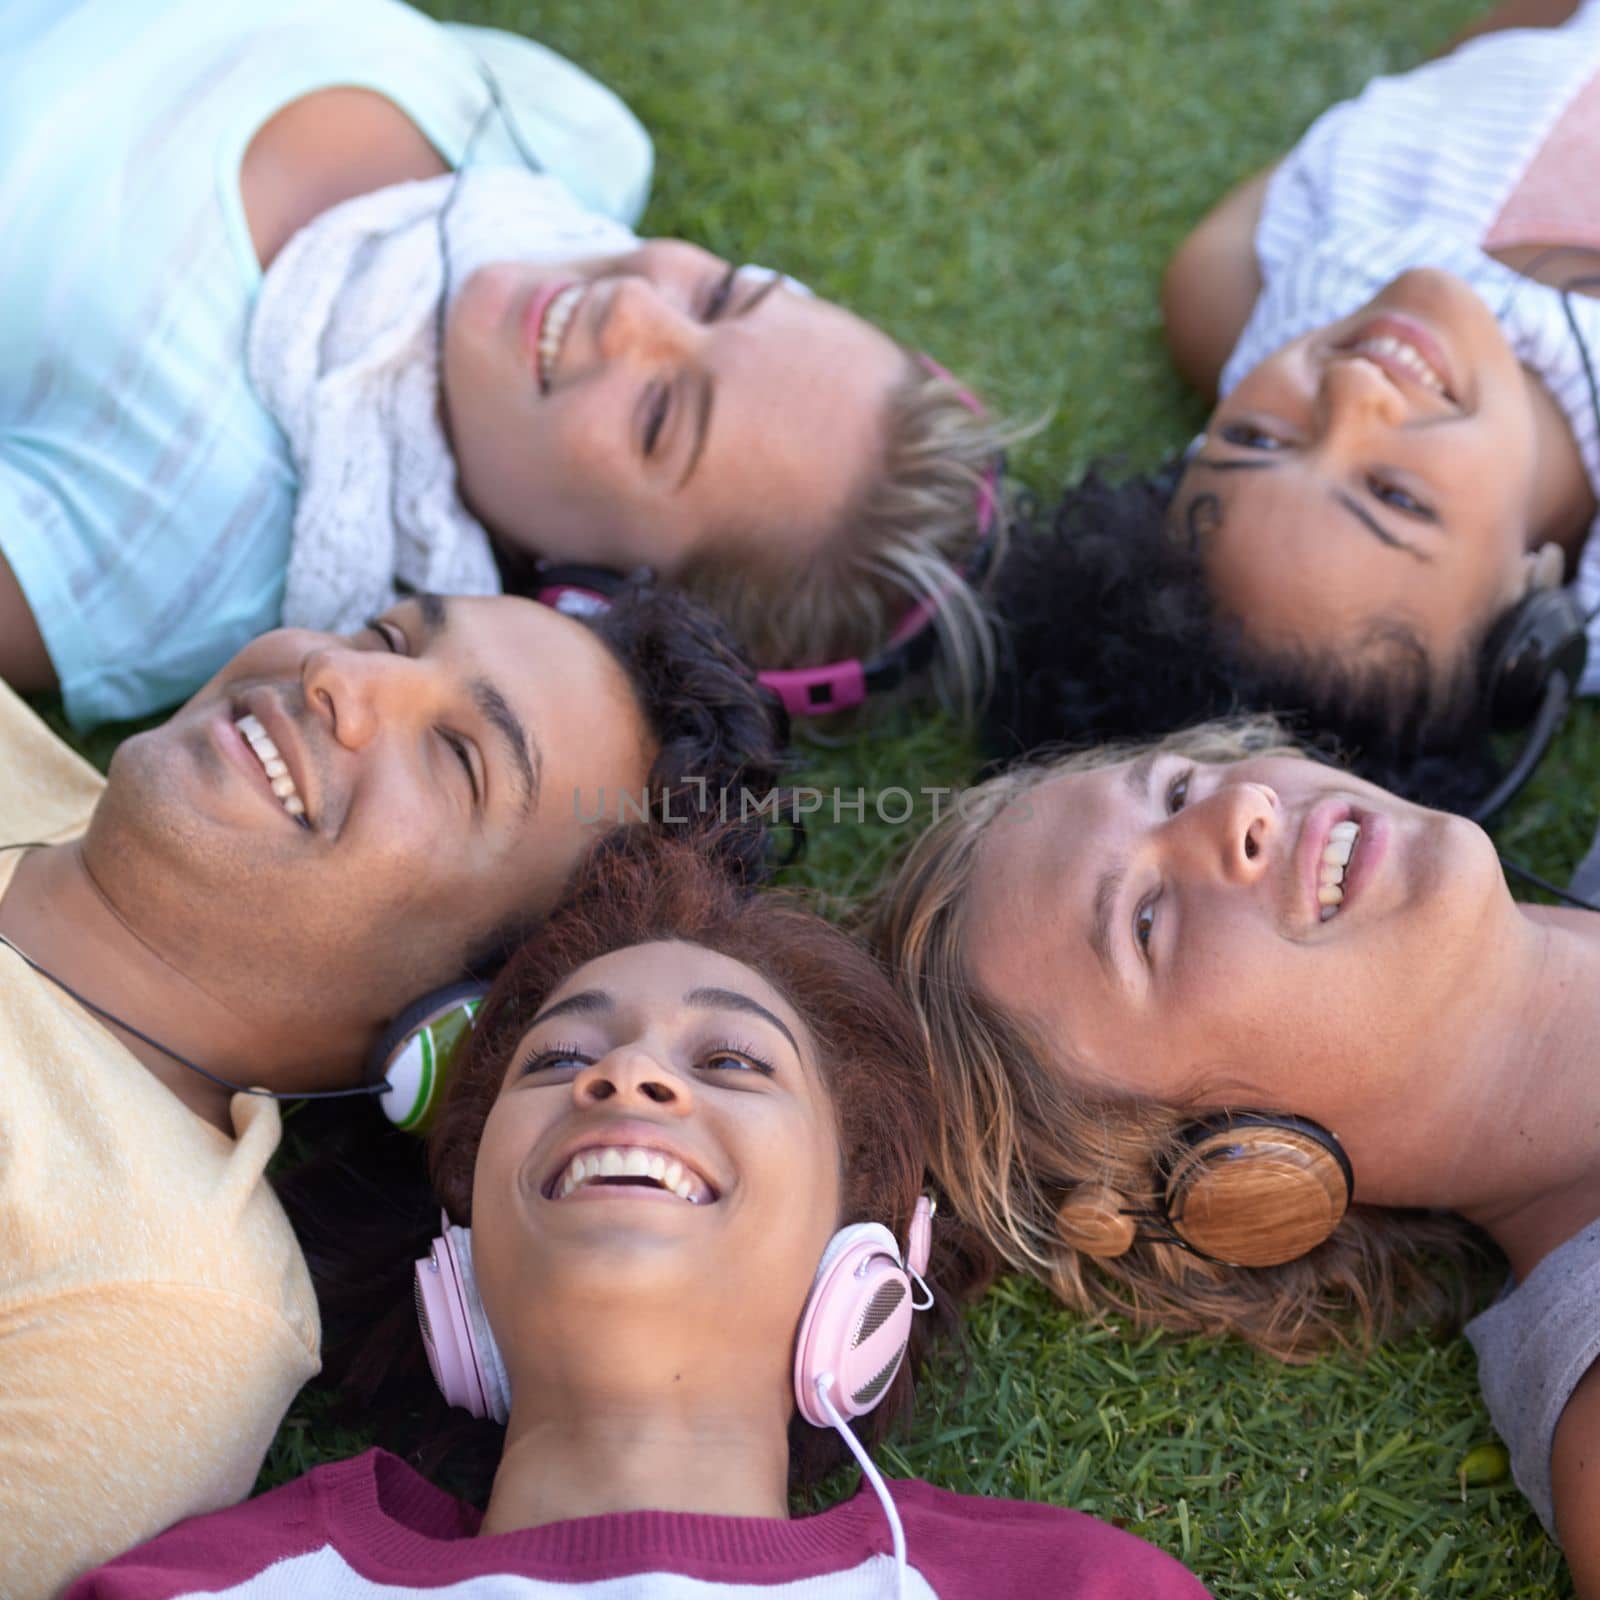 Sharing our love of music. A group of young students lying on the grass and listening to music. by YuriArcurs